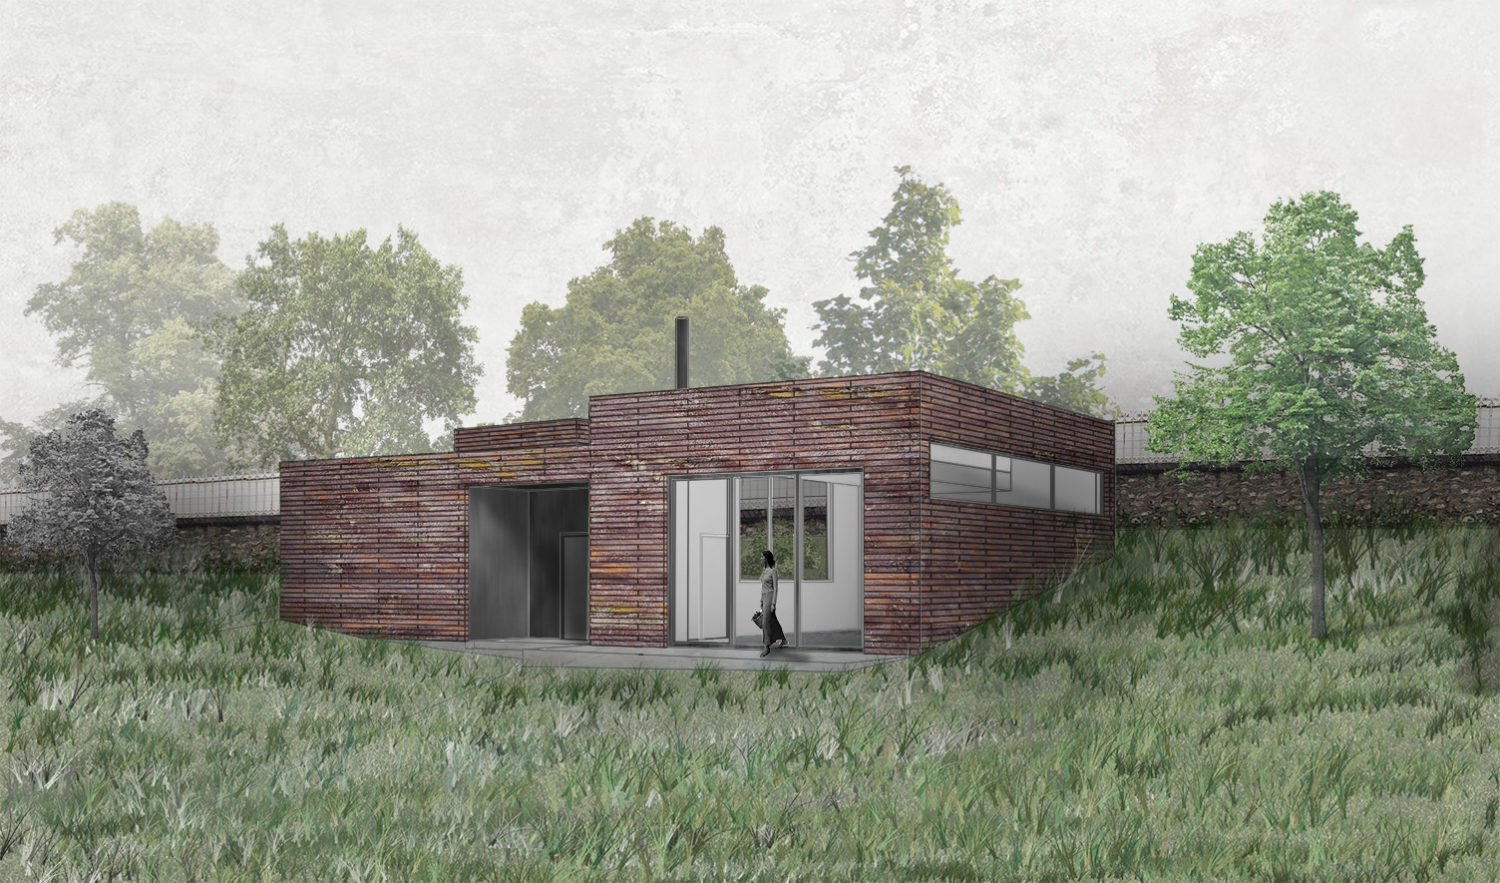 Planning permission for an artist studio in Meudon